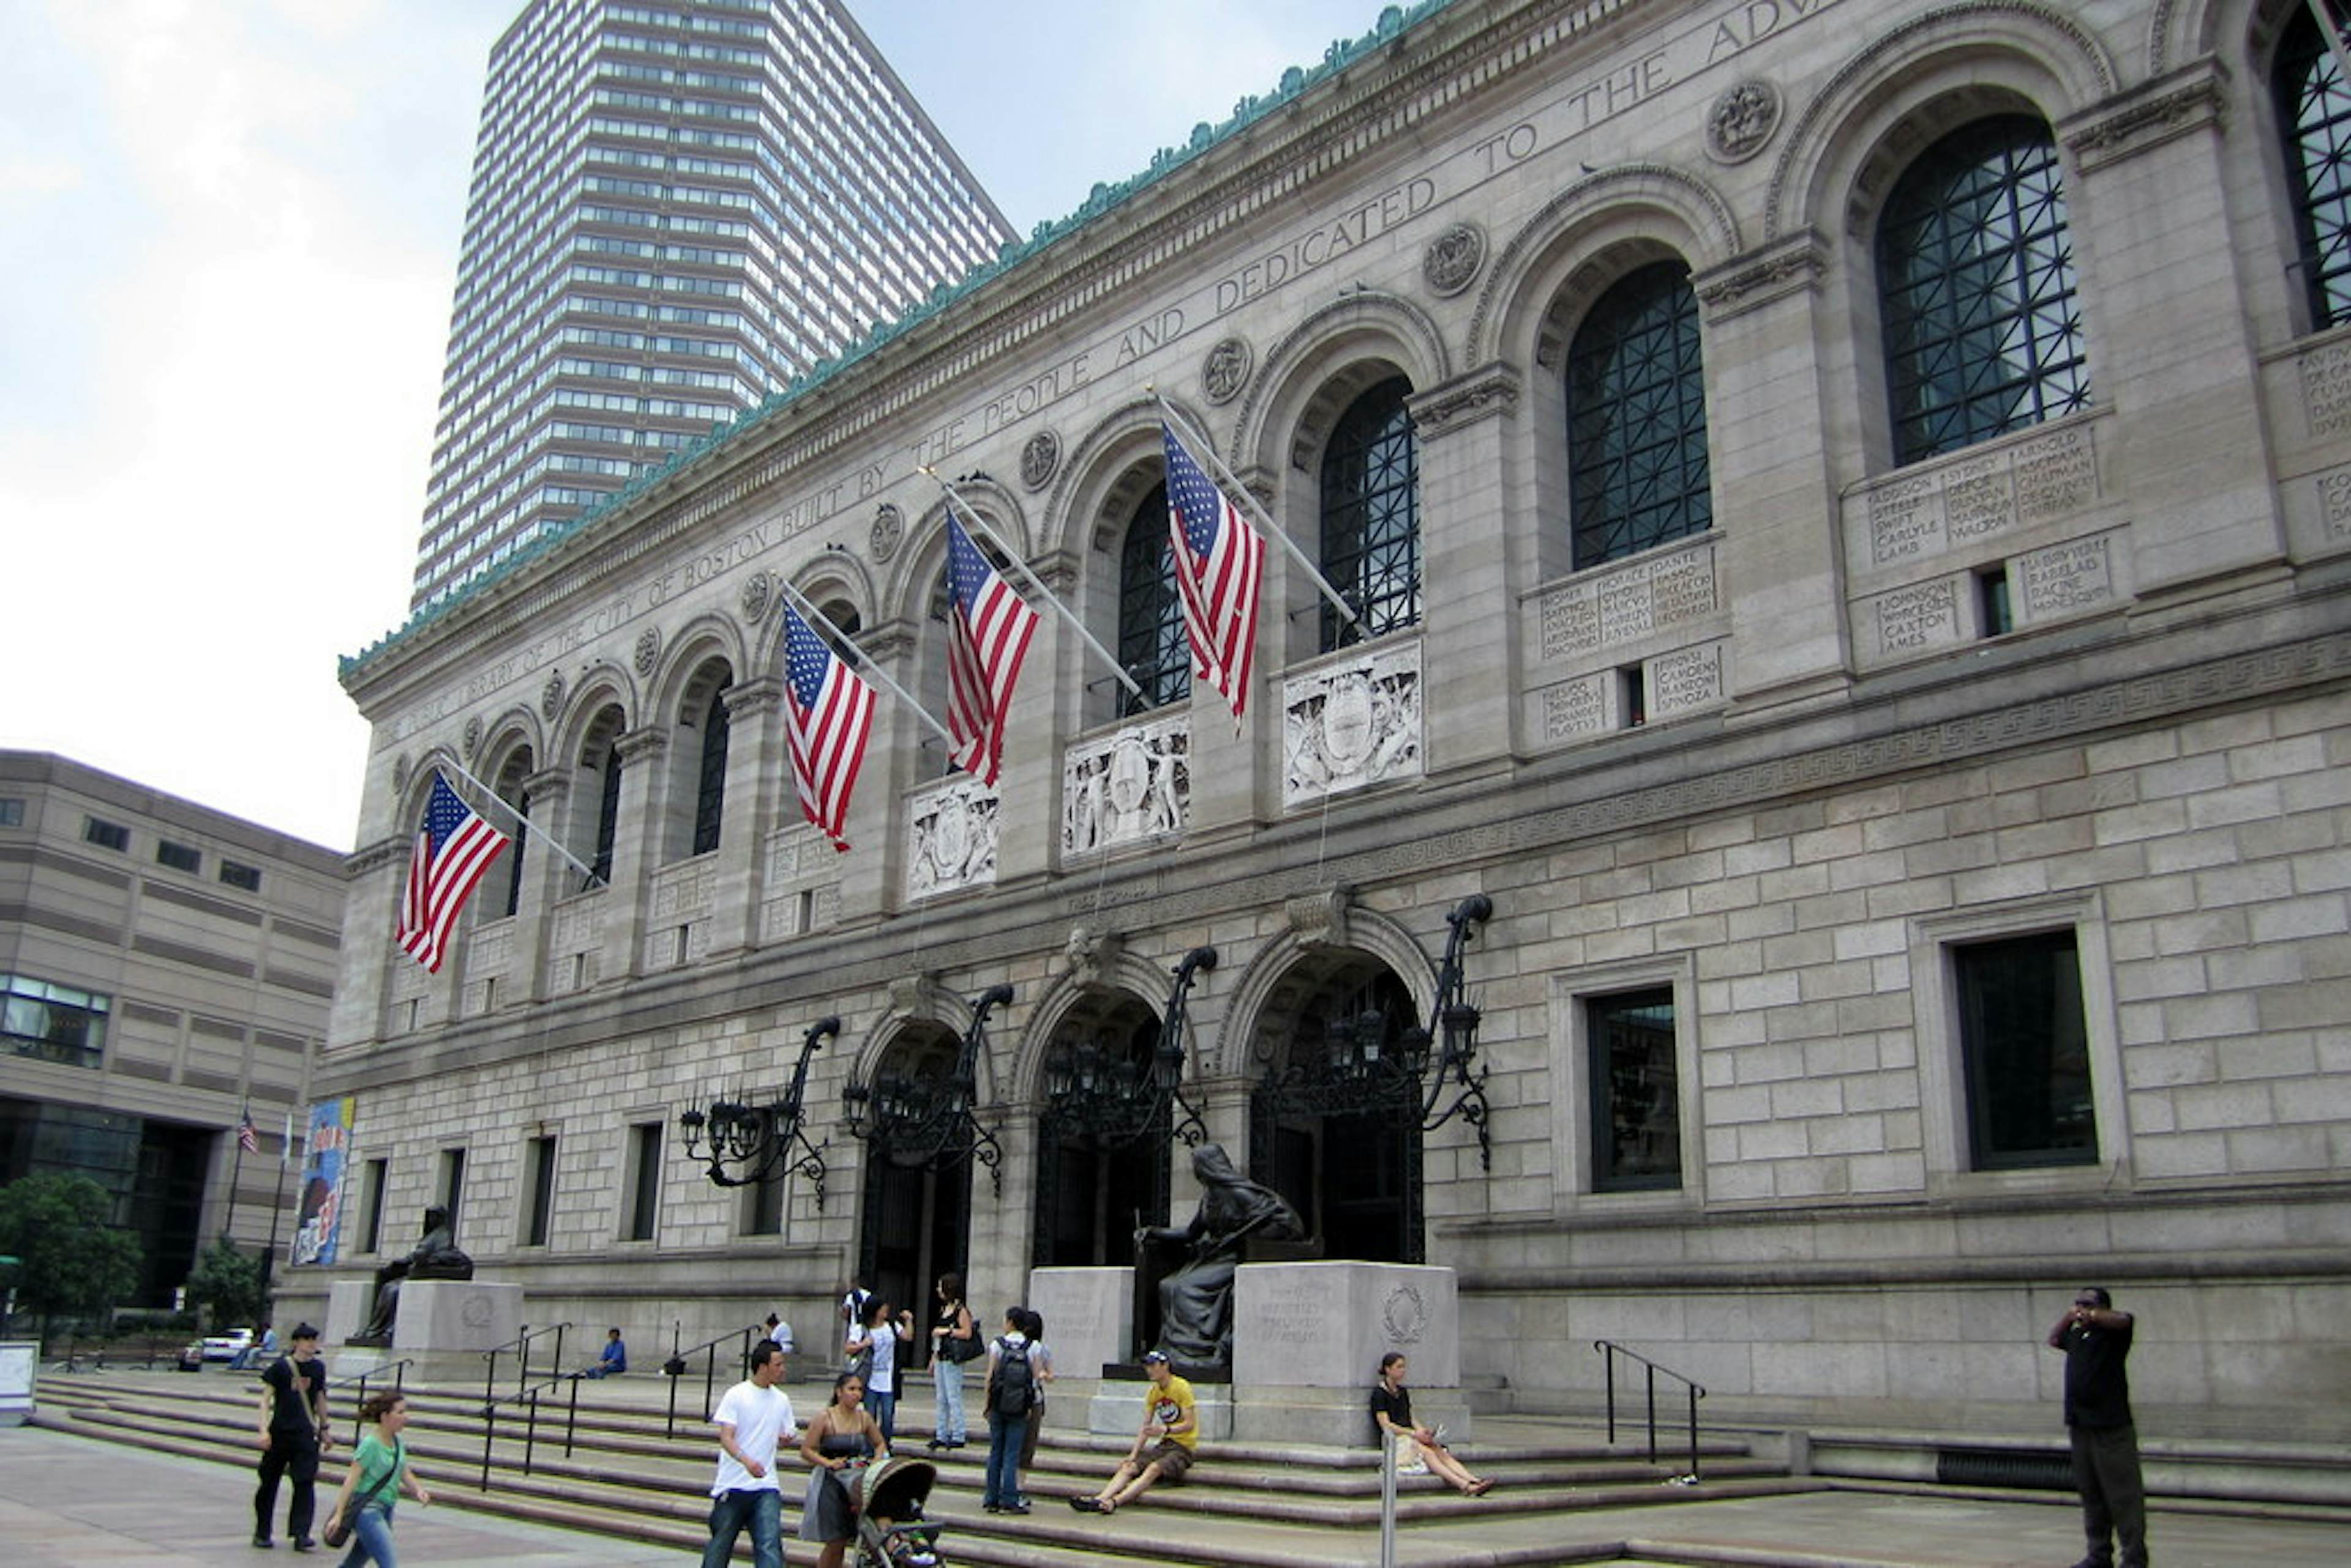 About the Boston Public Library